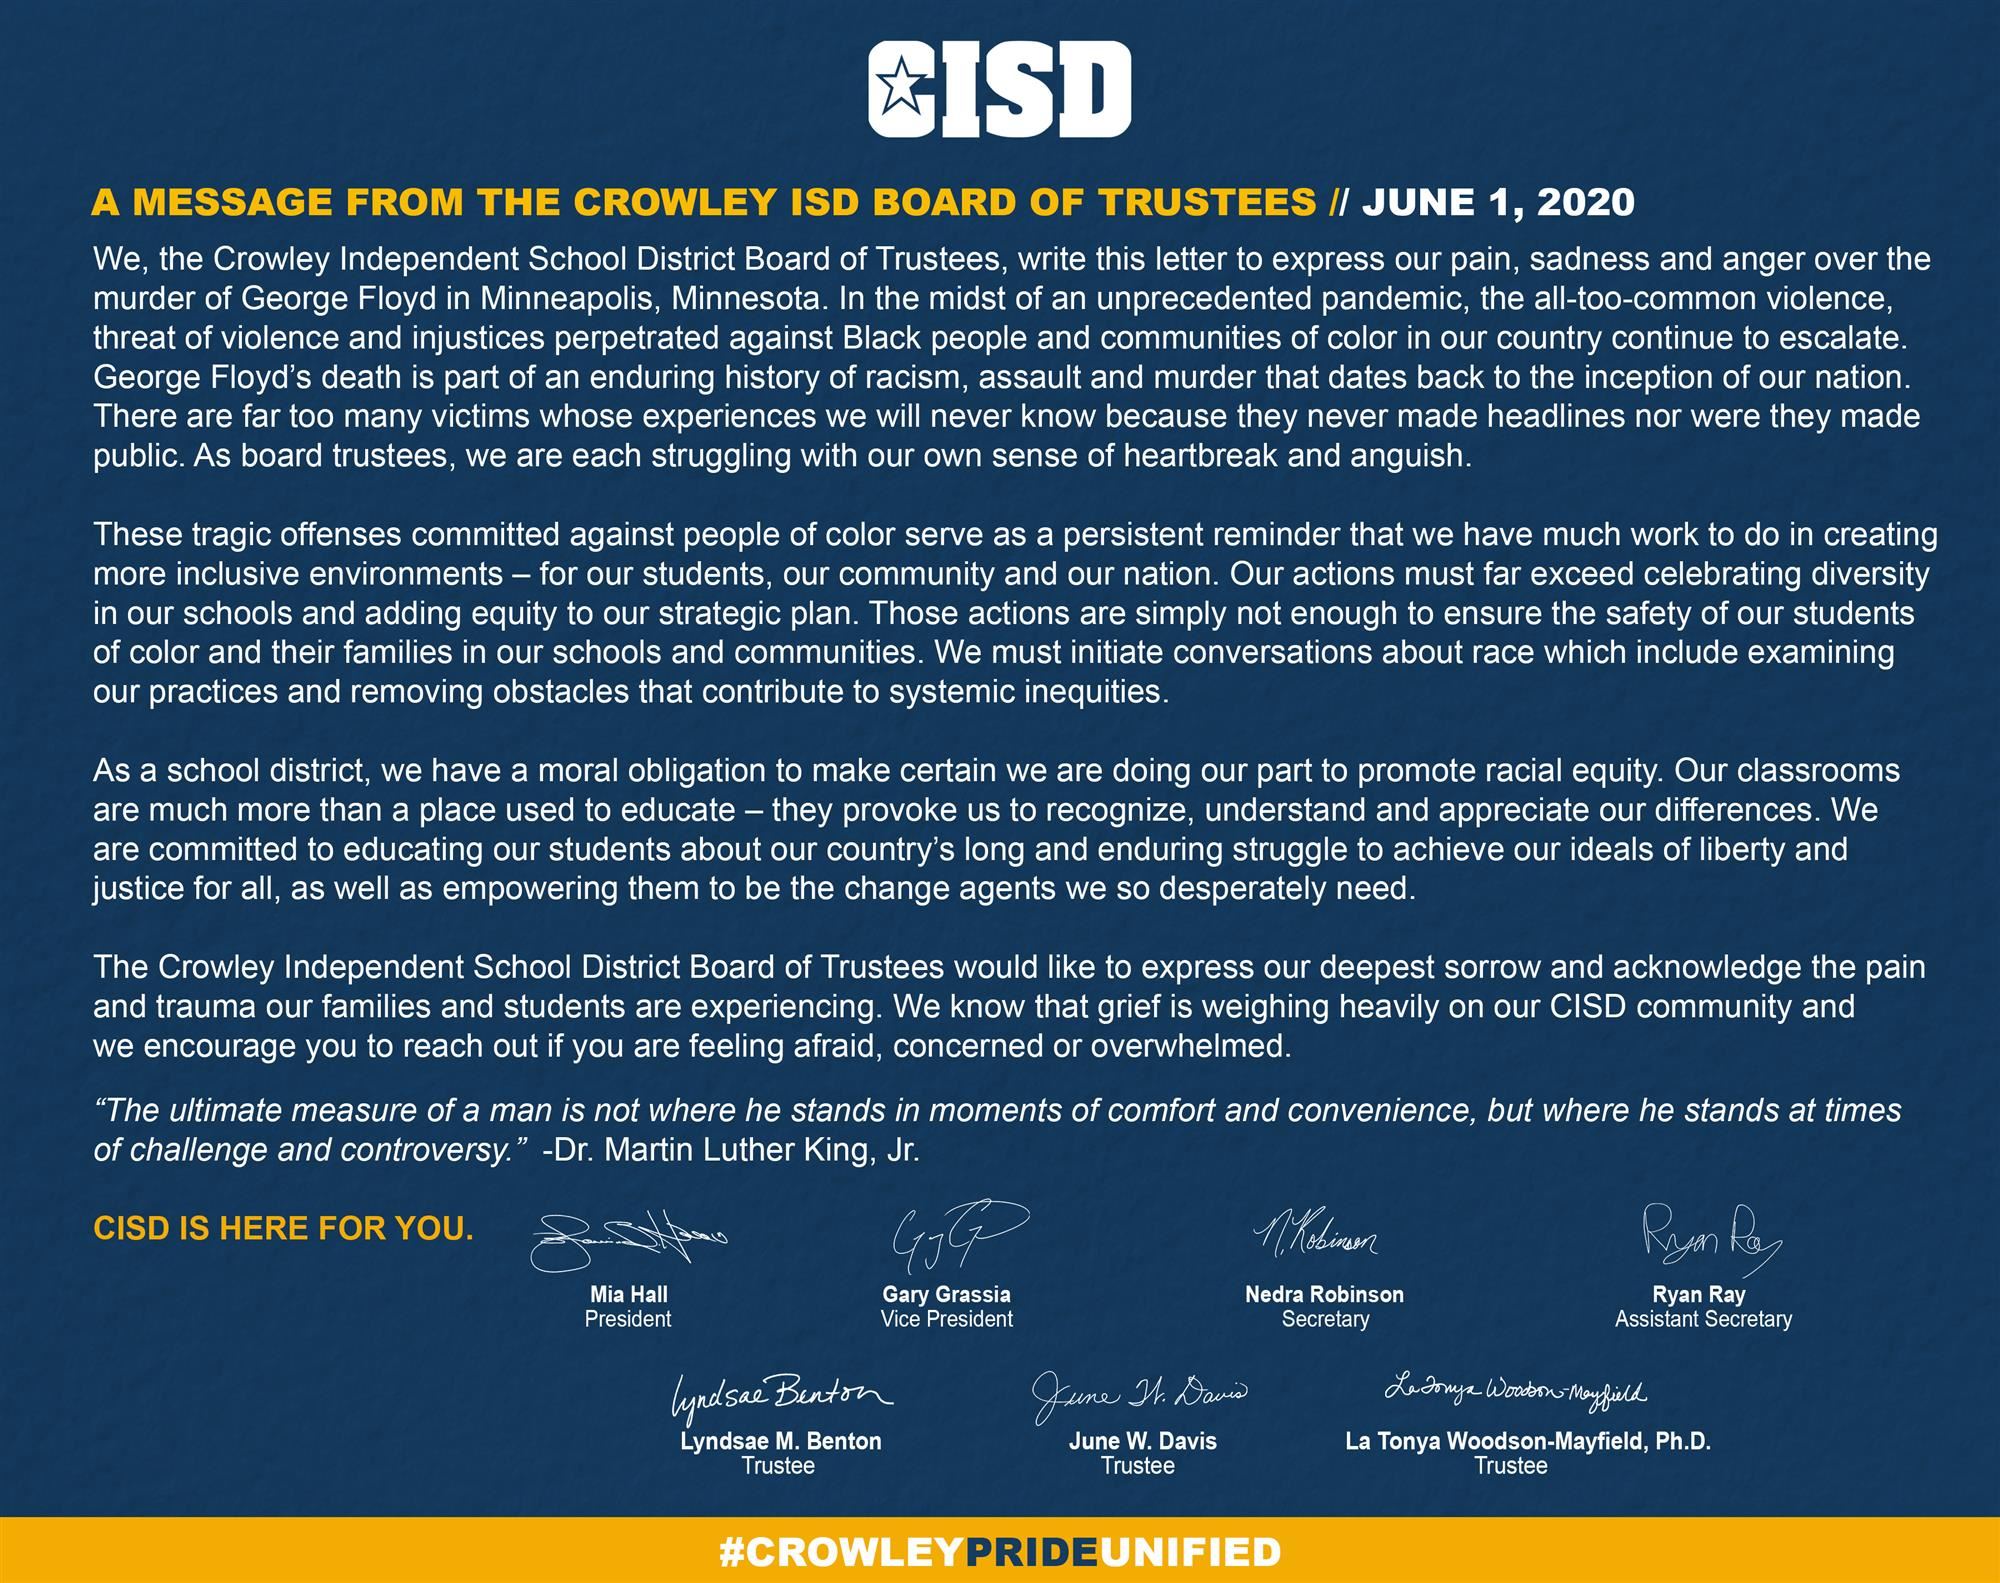 A message from the CISD Board of Trustees 